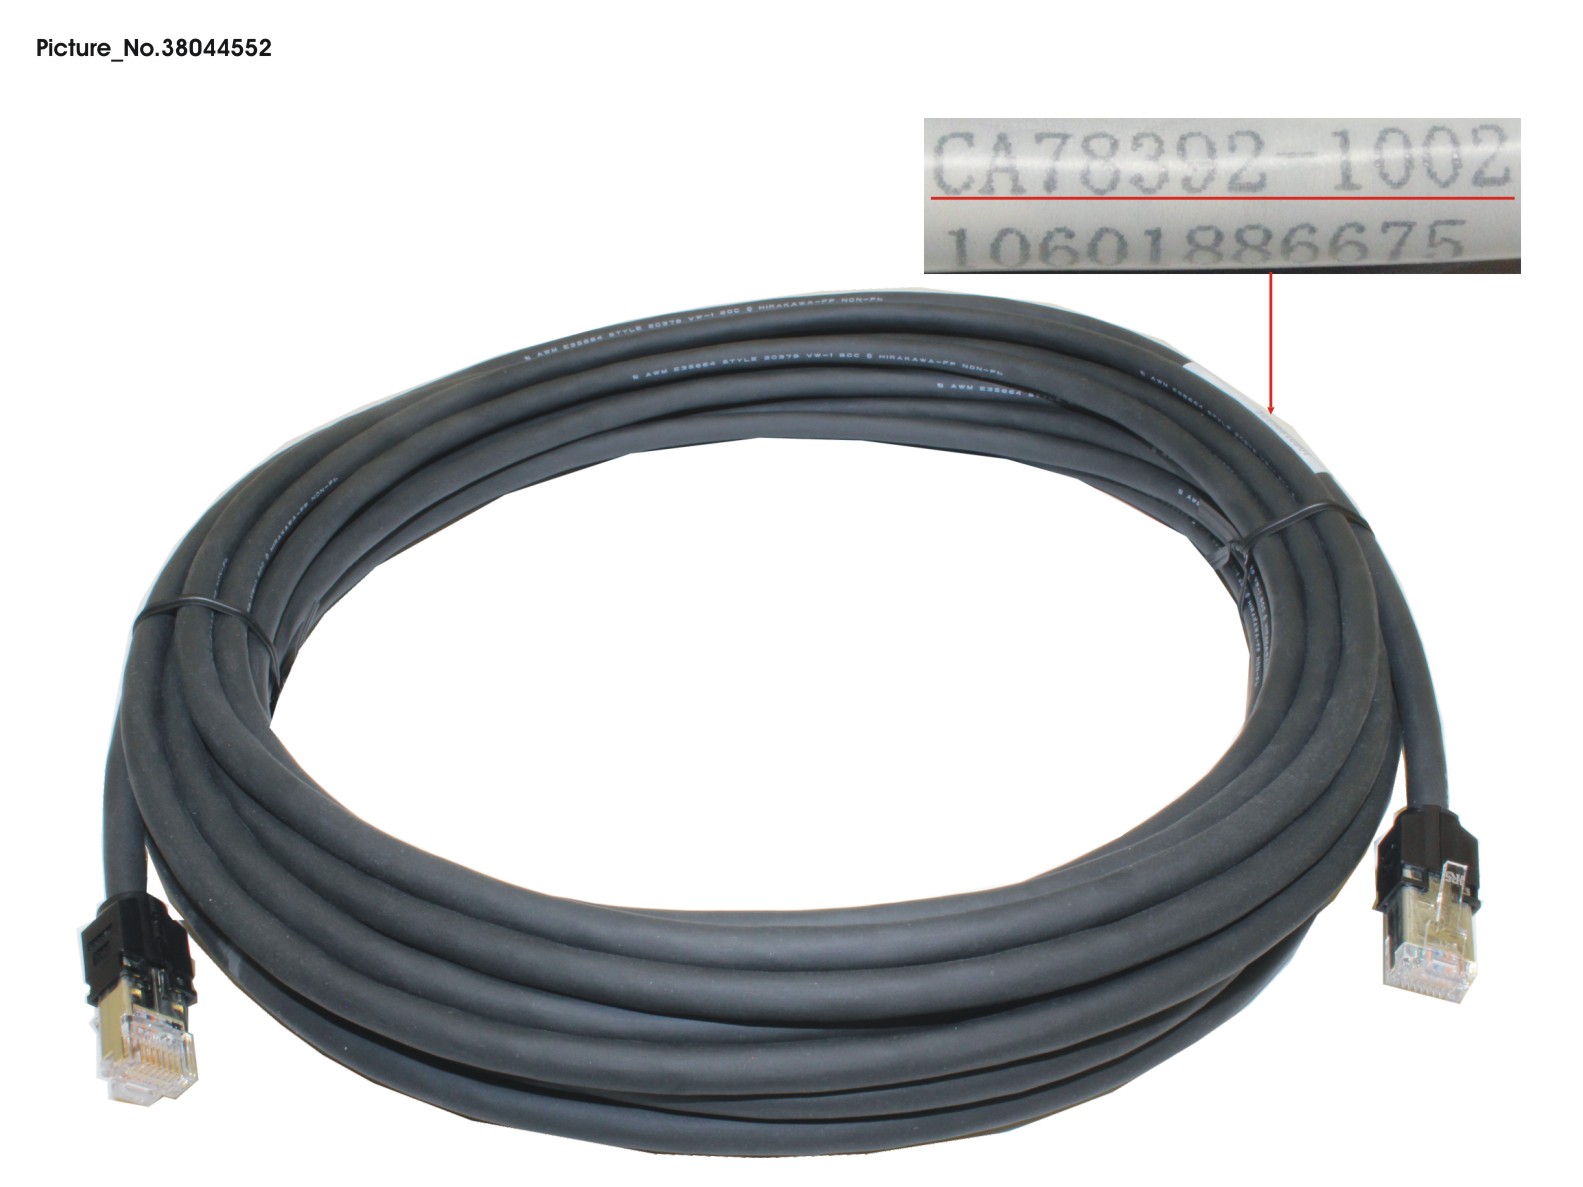 DX S3 HE MGT LAN CABLE 10M